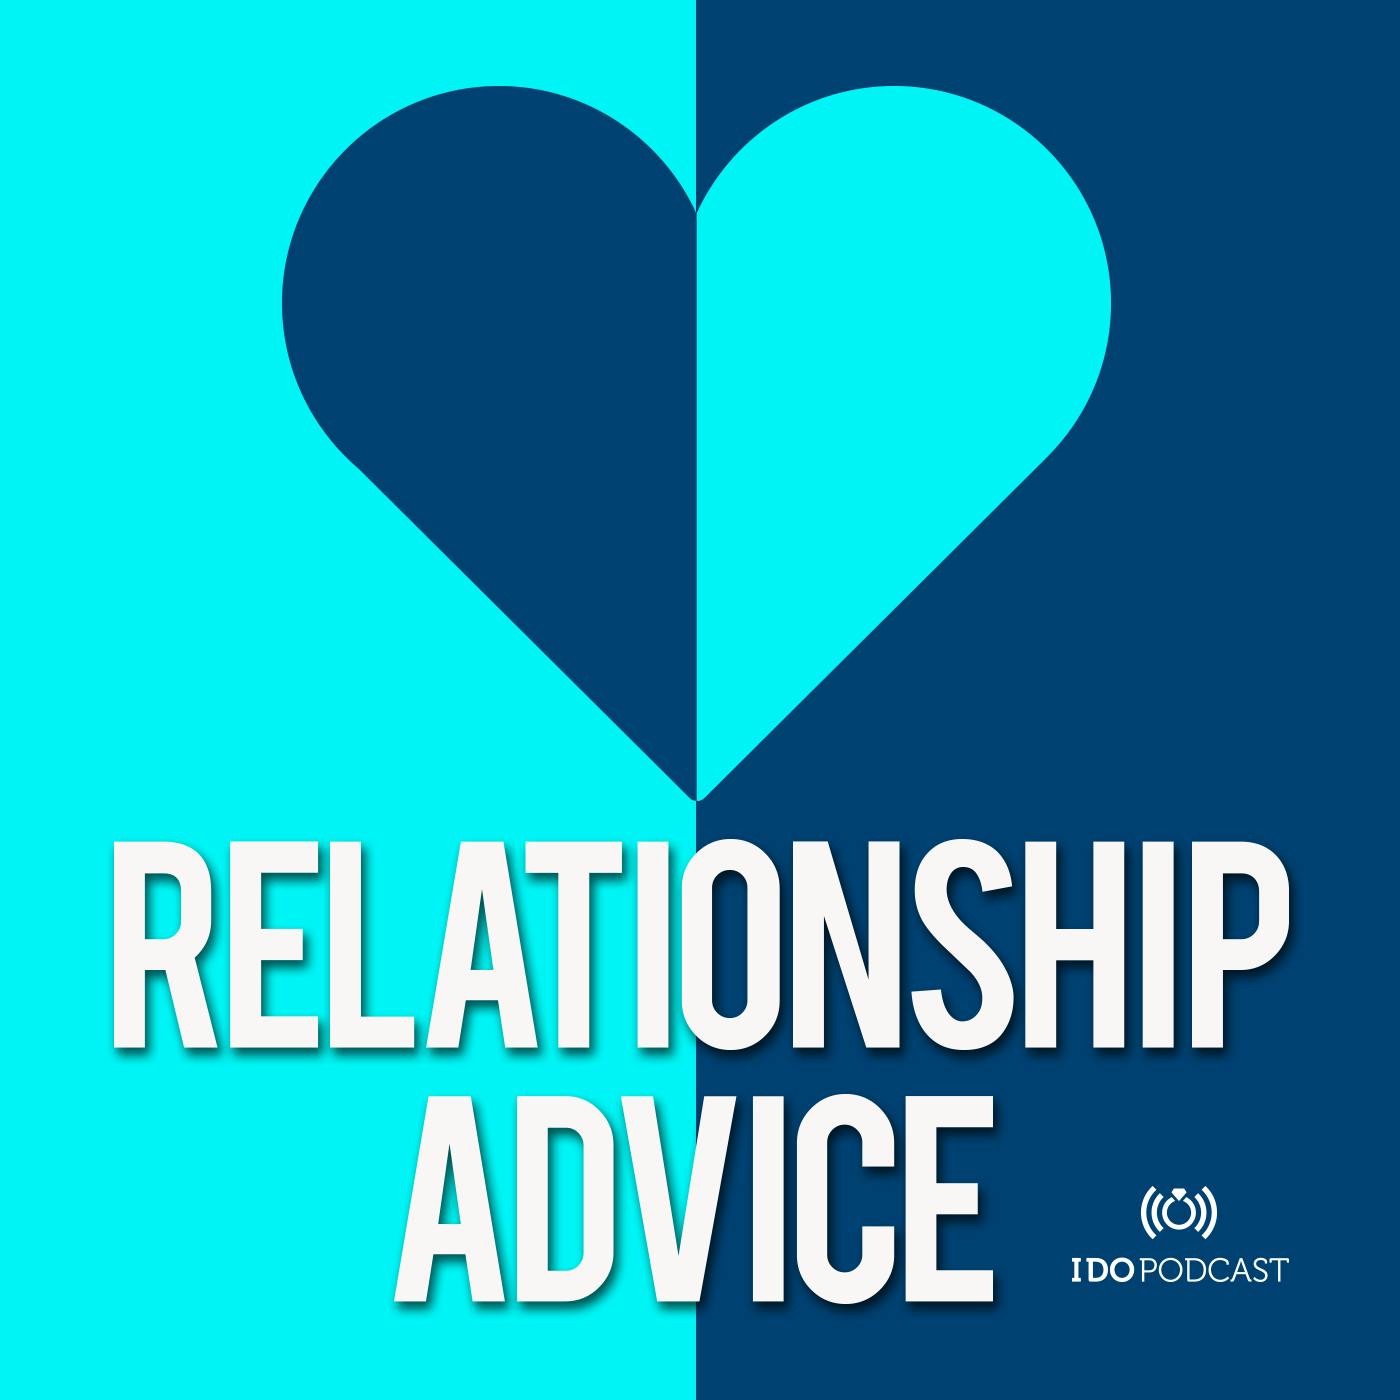 252: Everything You Need To Know About Couples Therapy